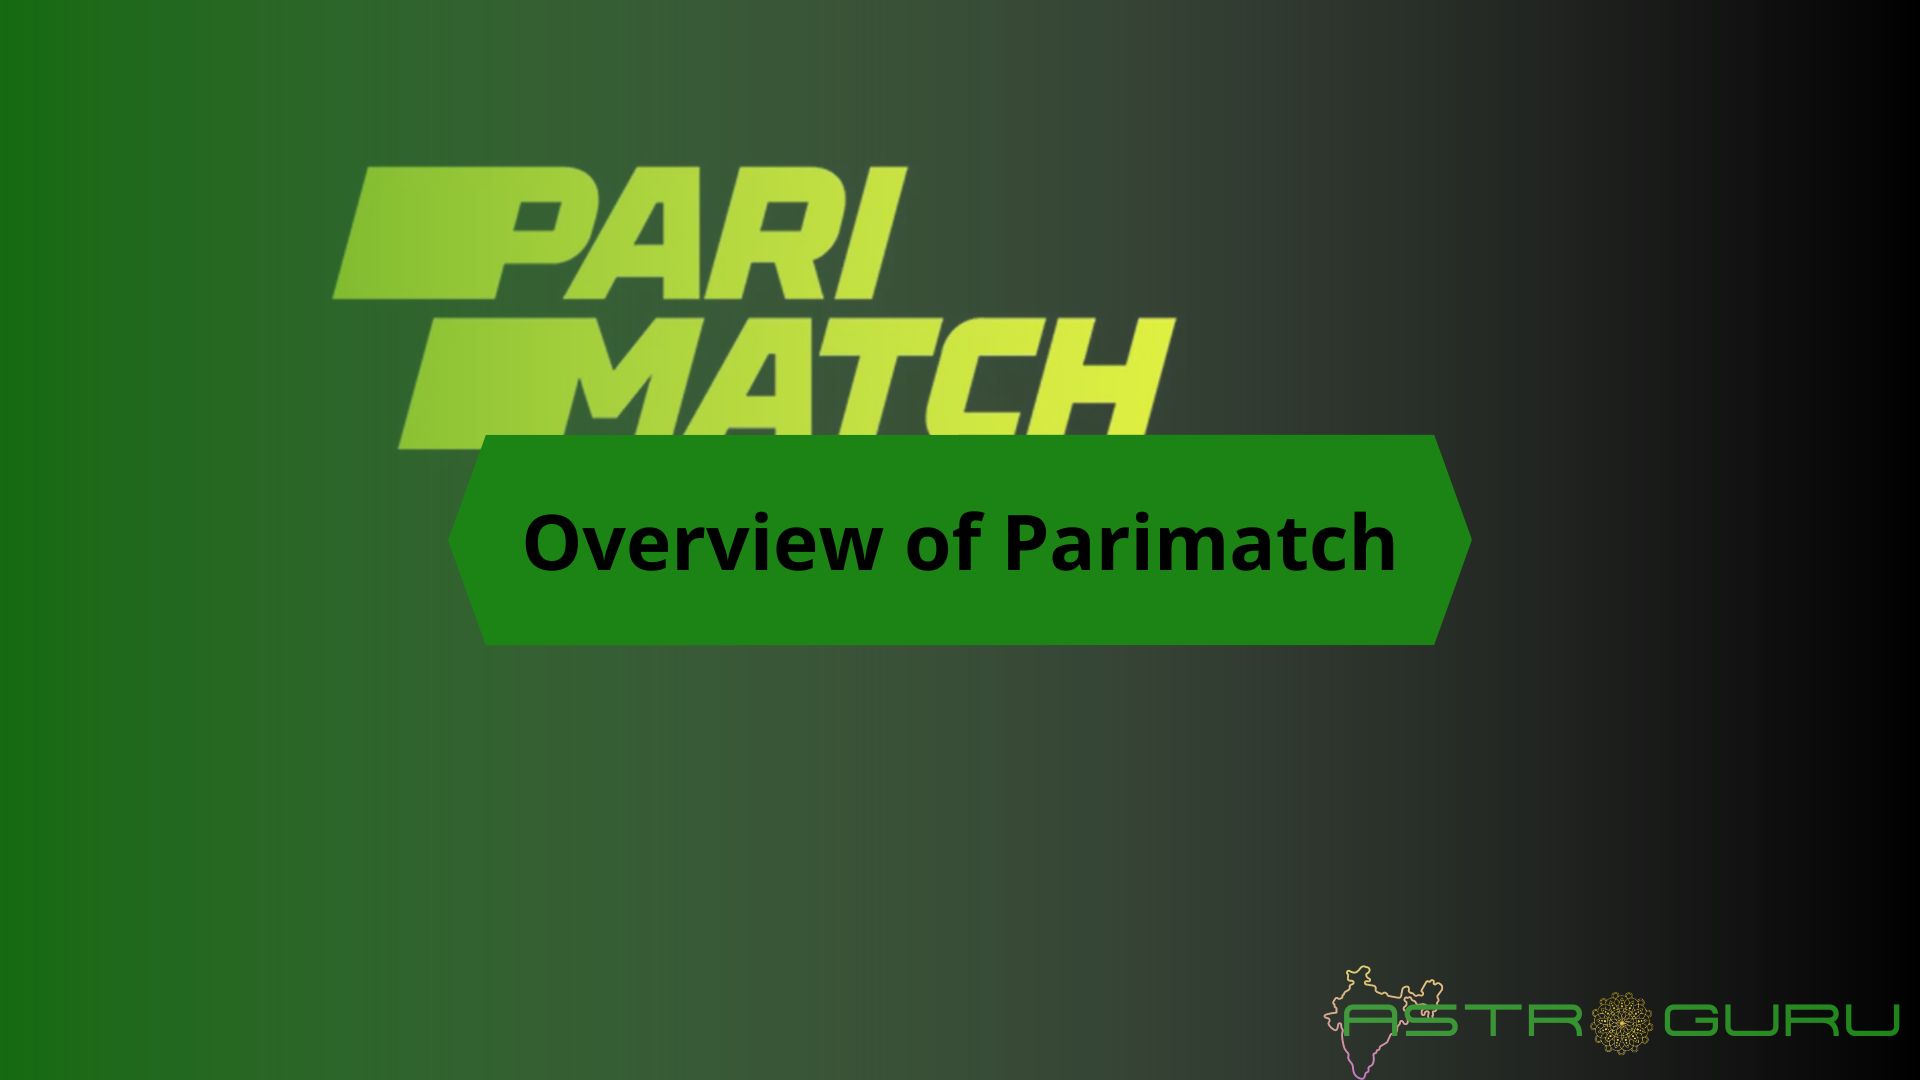 Overview of Parimatch